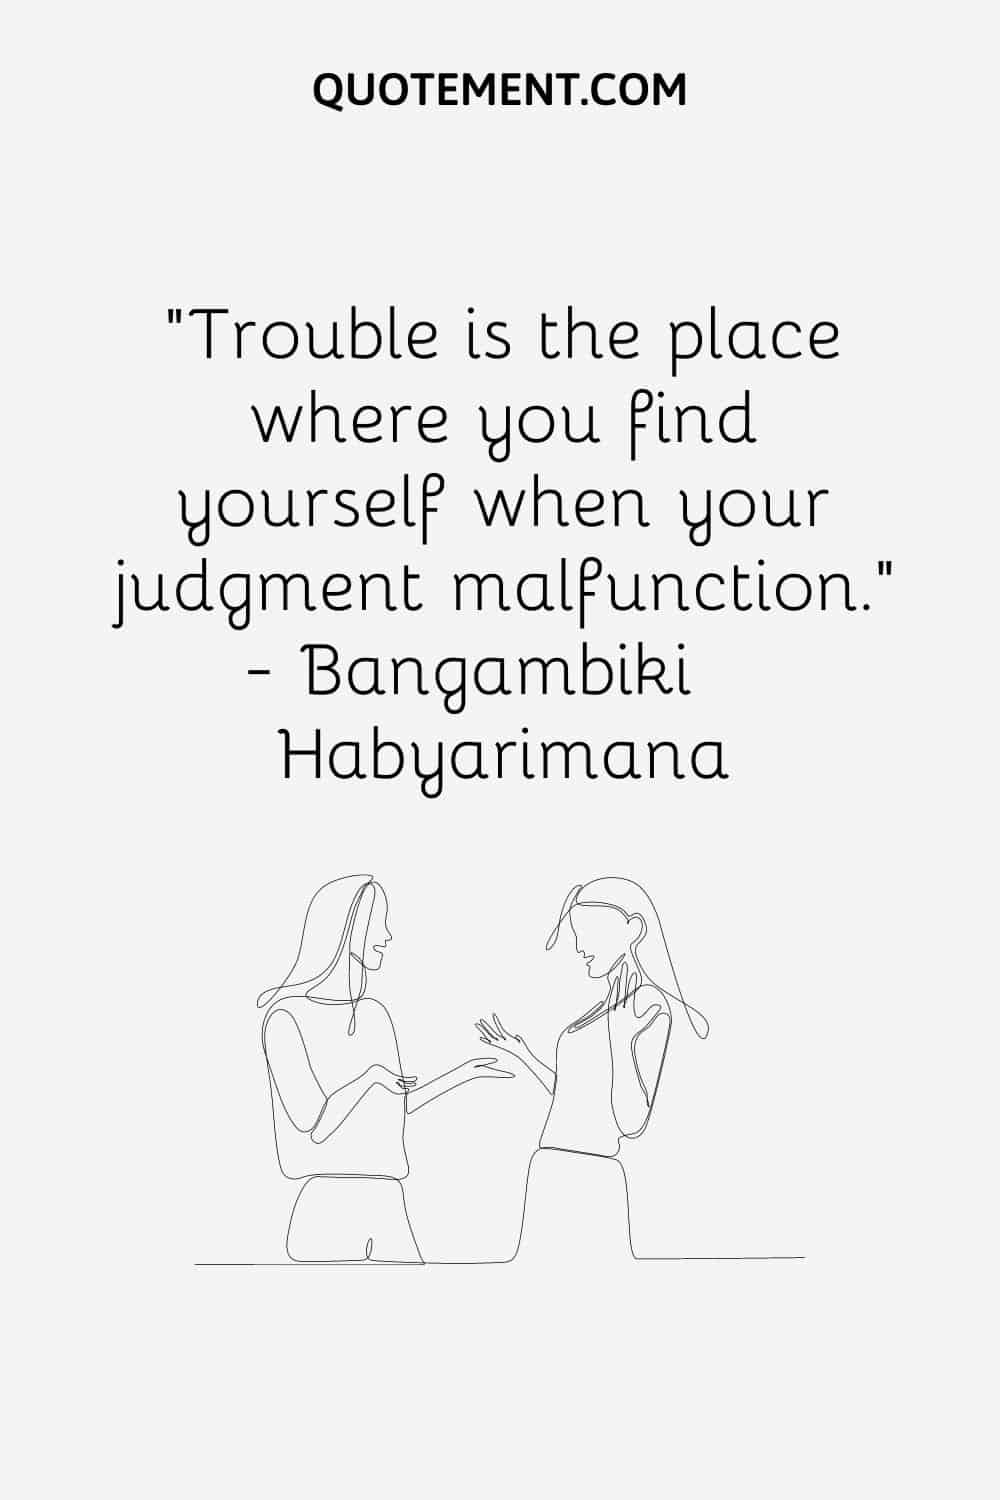 “Trouble is the place where you find yourself when your judgment malfunction.” ― Bangambiki Habyarimana